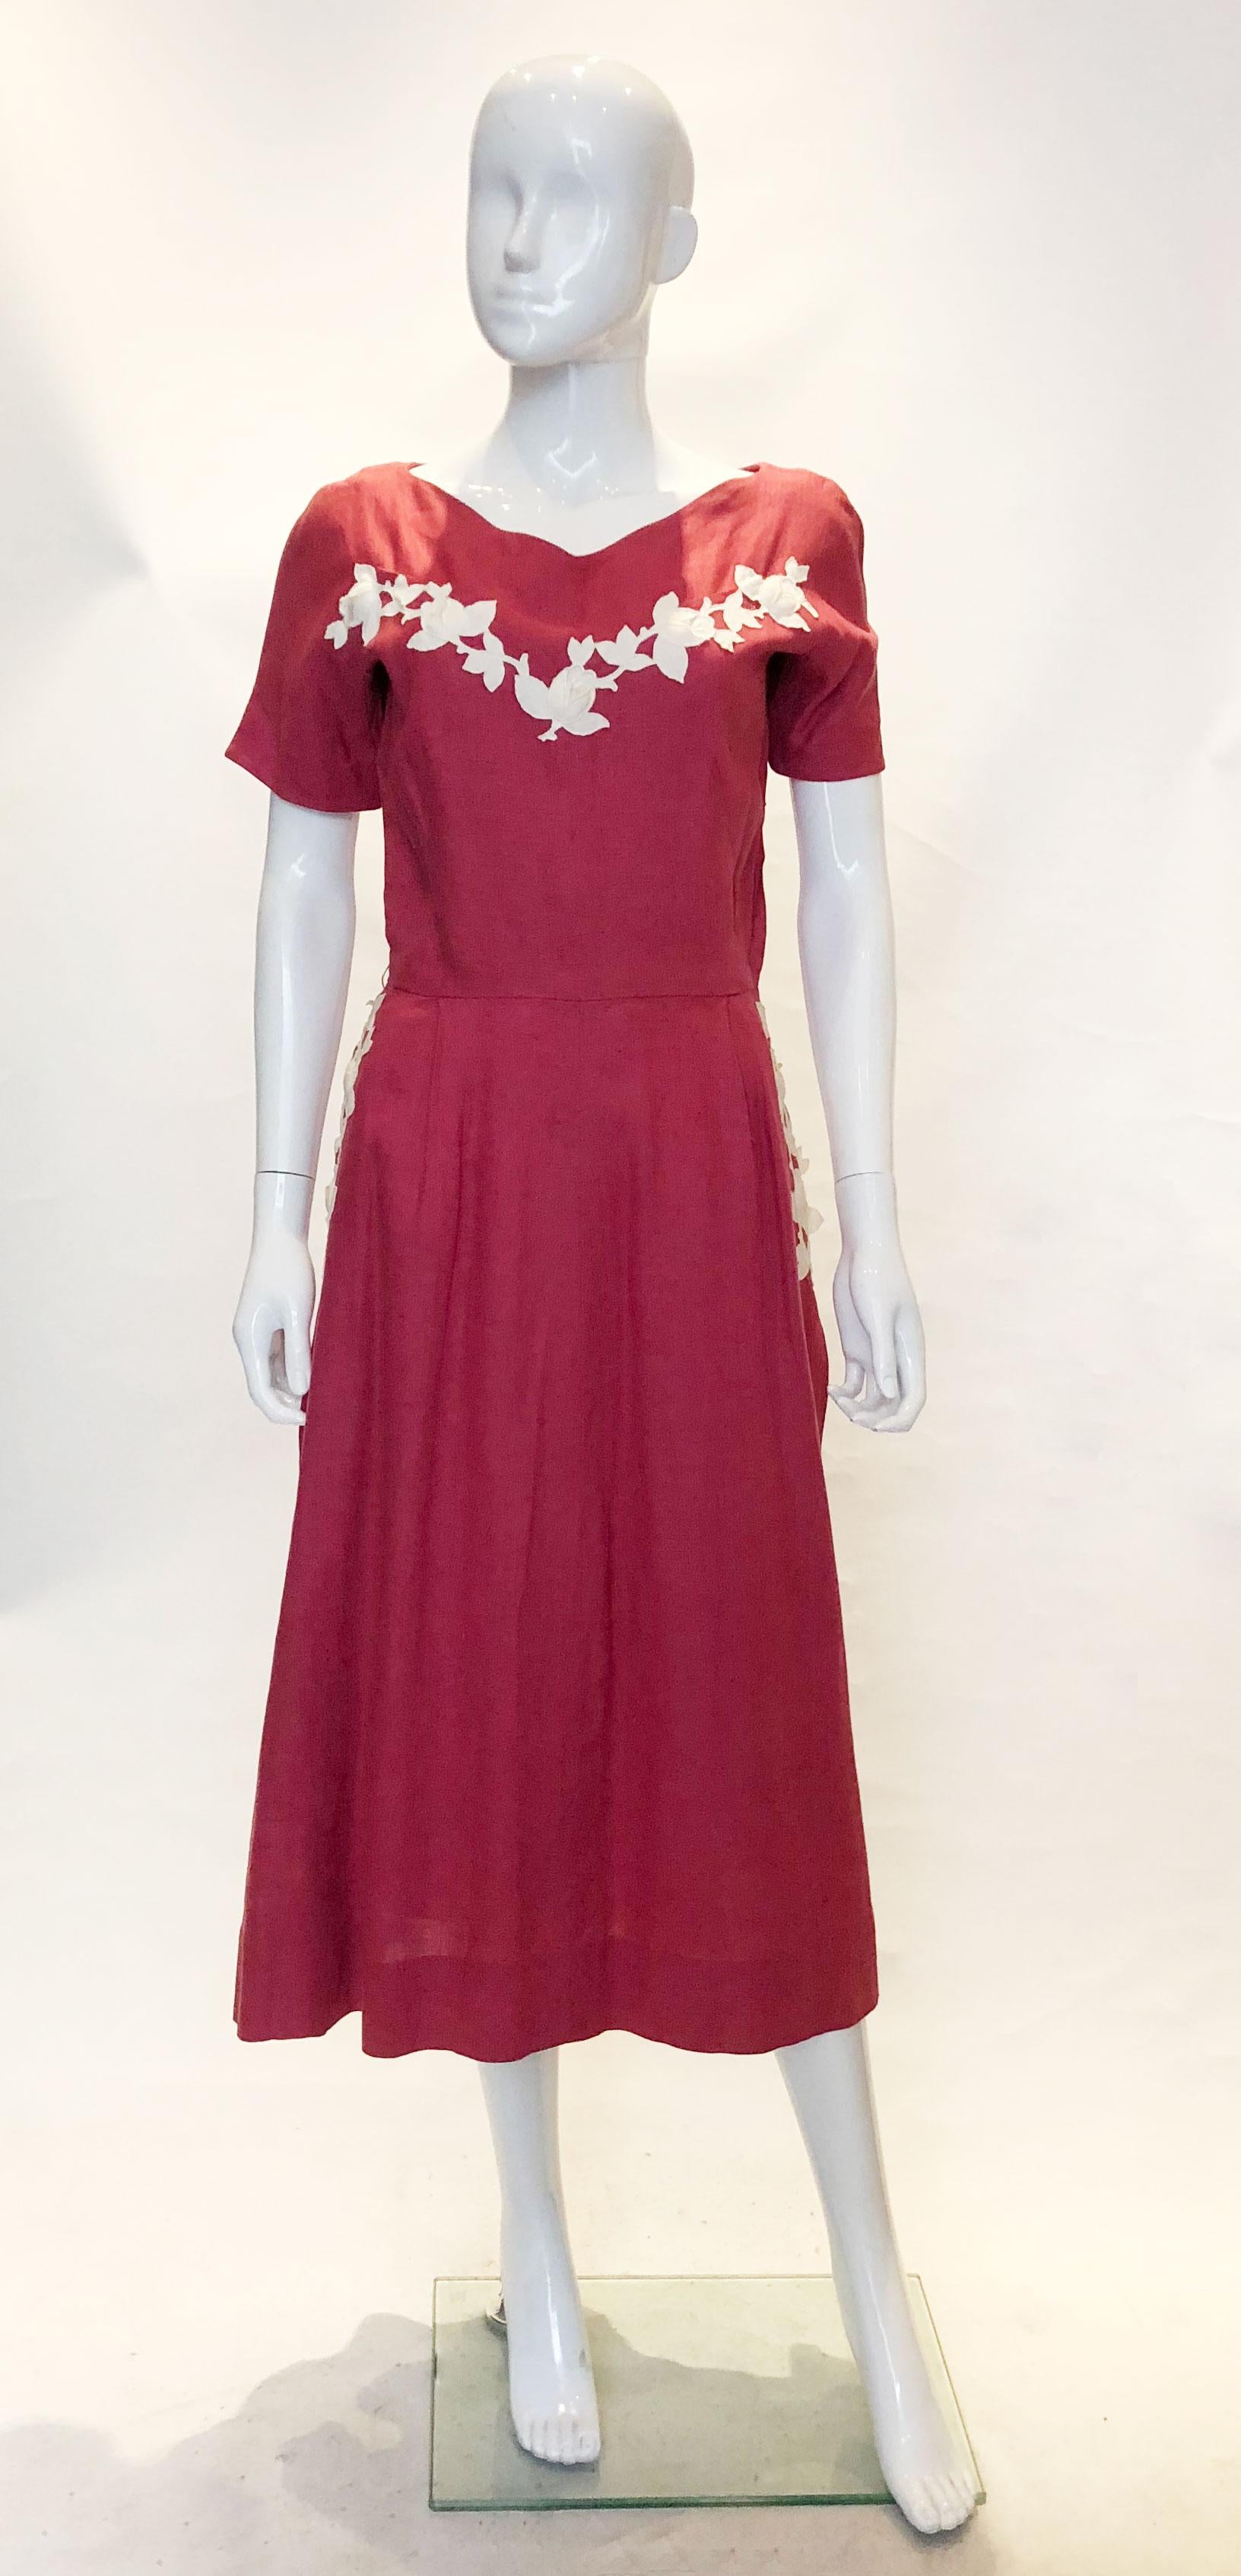 A pretty linen dress from the 1950s. The dress has a v neckline with a row of rosebuds. It has short sleaves , a flared skirt with pockets on either side and a side zip opening. The rose buds are stuffed, giving an extra dimension to the dress.